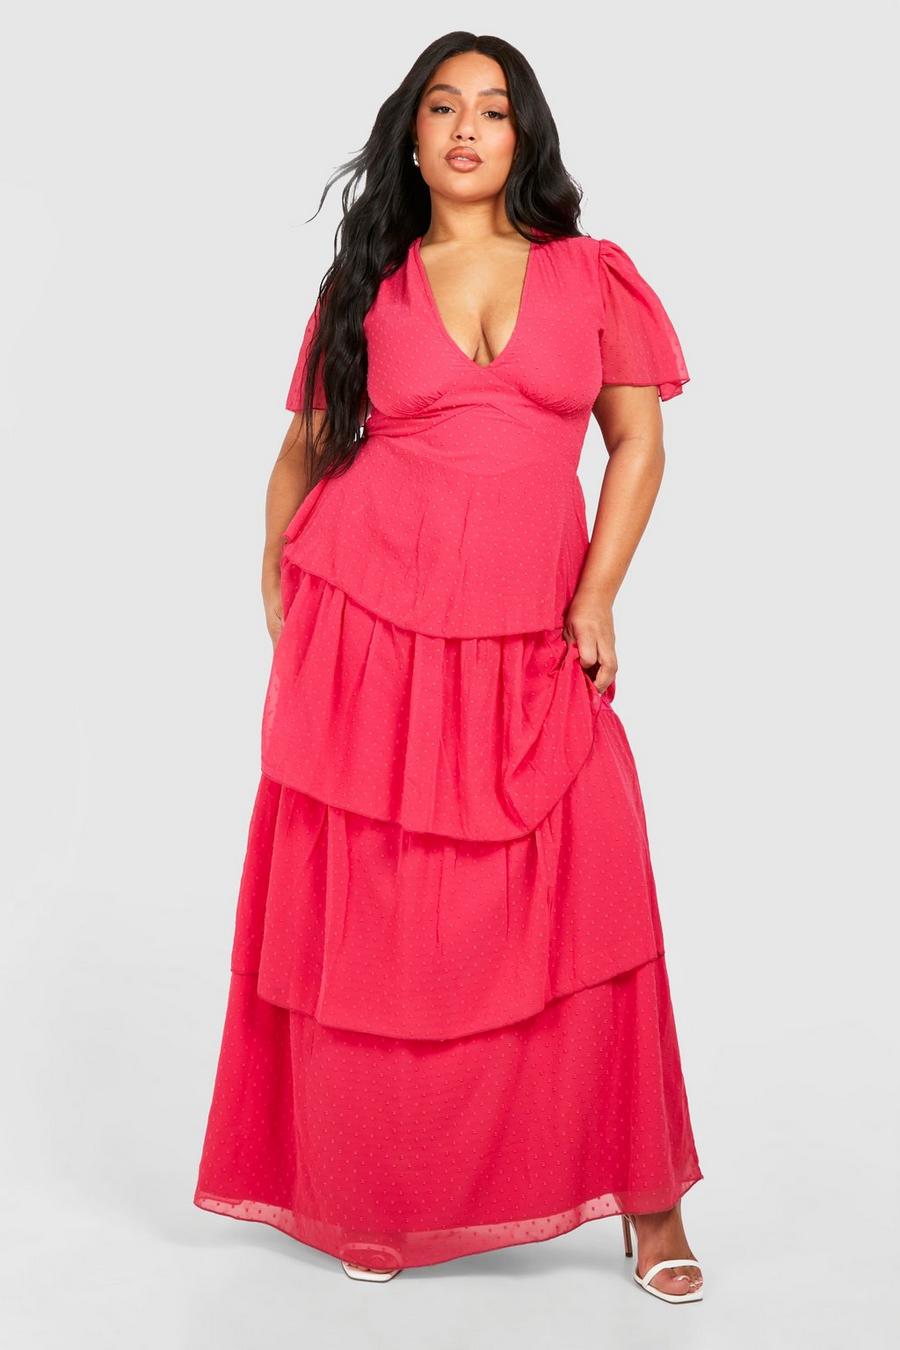 Grande taille - Robe longue à manches larges, Hot pink